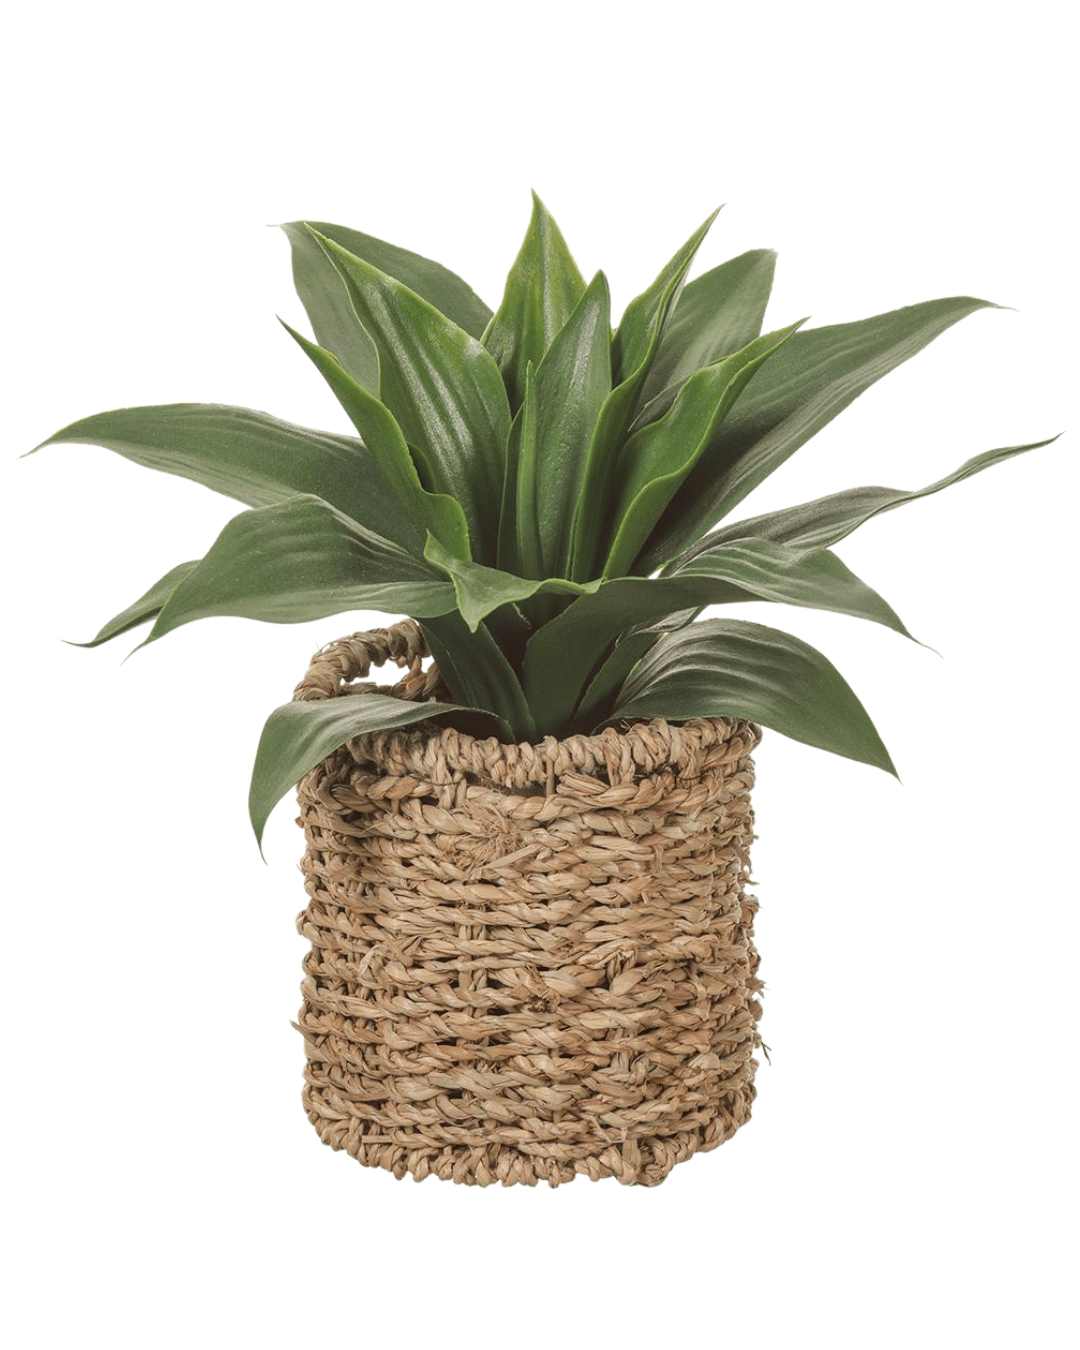 A healthy green 10&quot; Agave in Basket plant with long, pointed leaves sits in a woven basket on a white background in a Scottsdale Arizona bungalow.